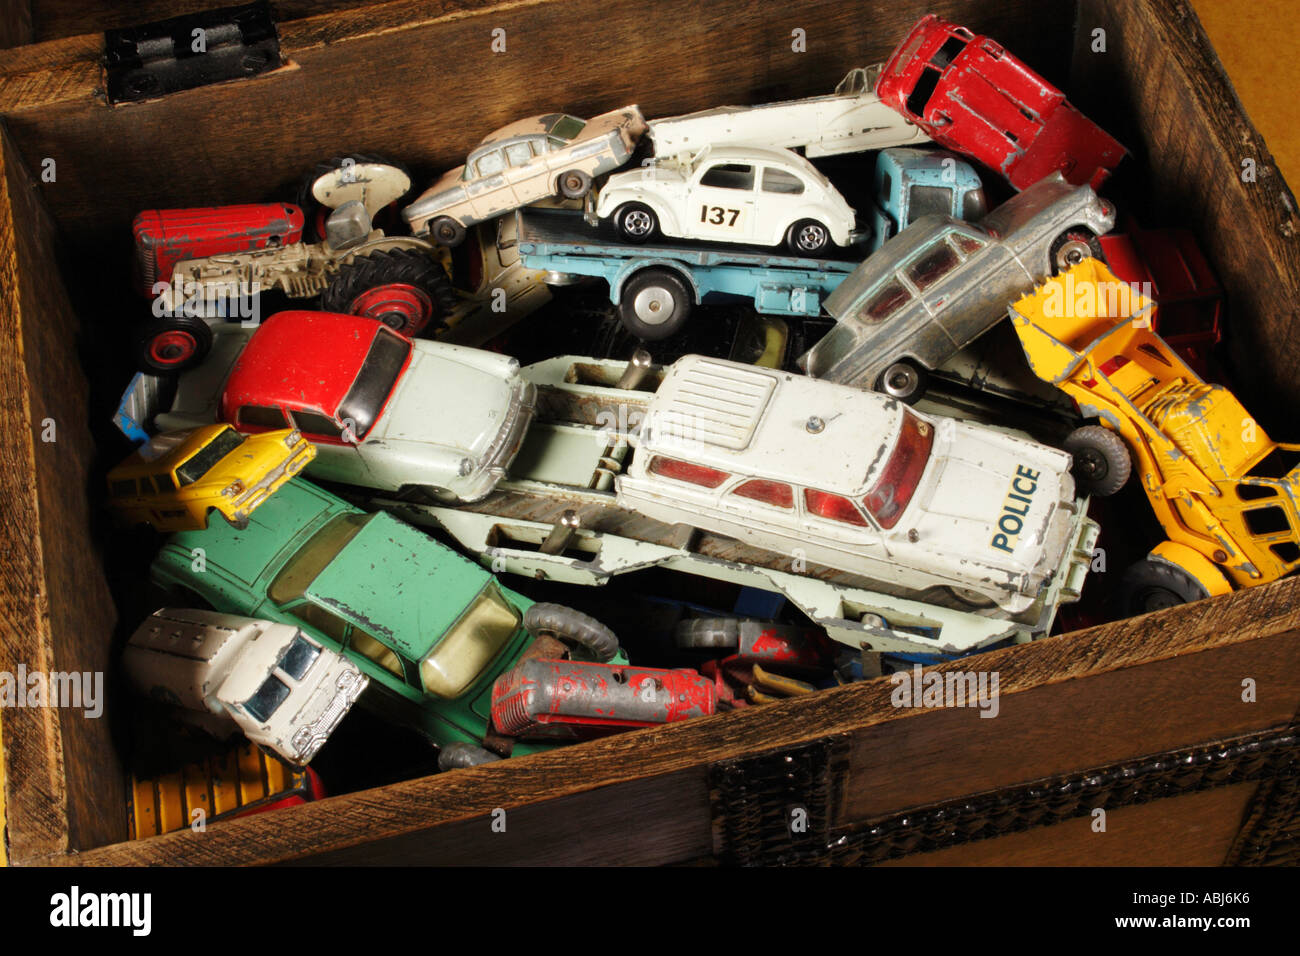 An old toy box. Stock Photo